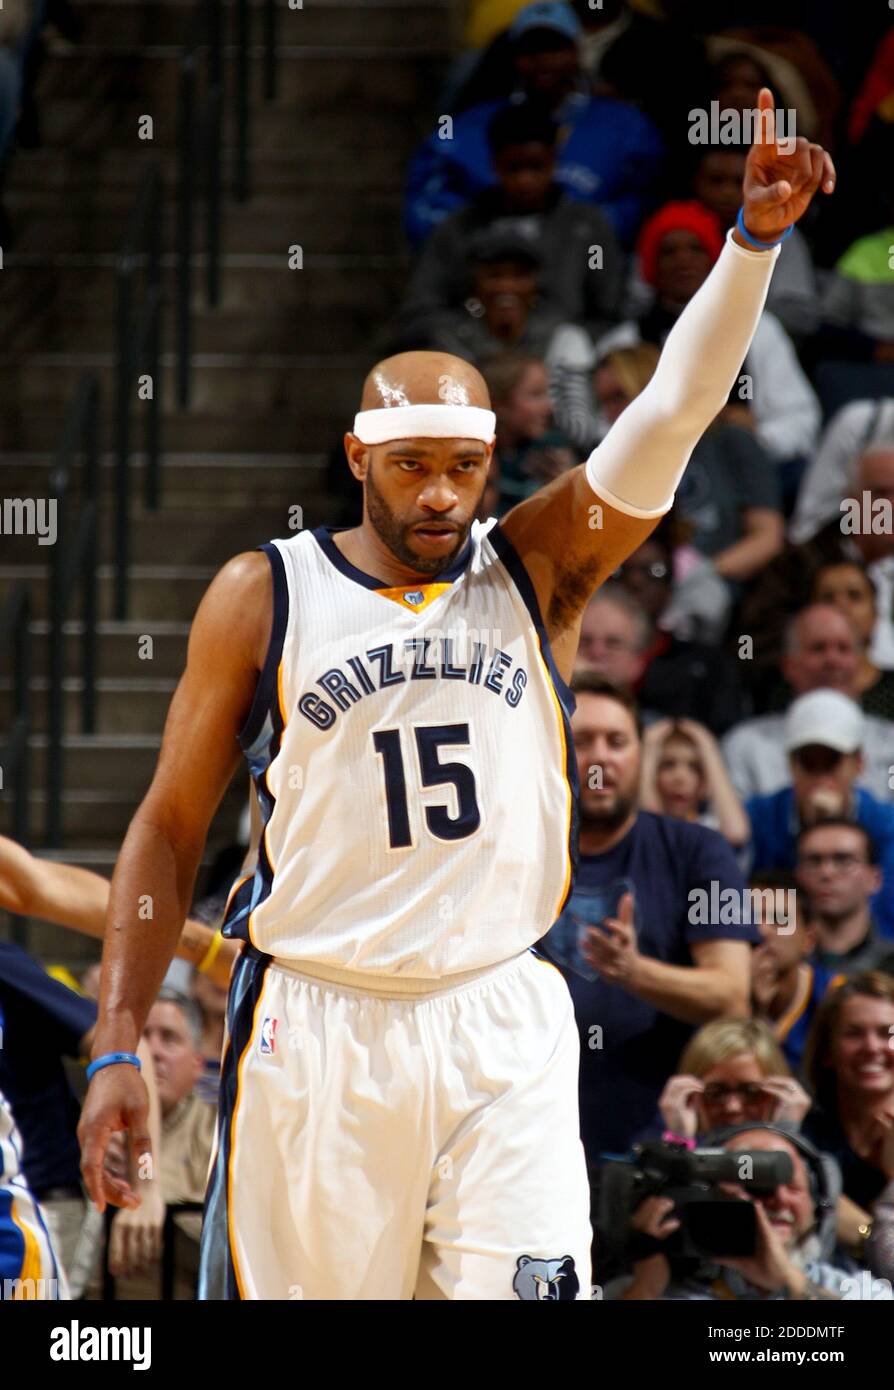 The Memphis Grizzlies' Kosta Koufos, left, and Vince Carter celebrate  during the first half against the New Orleans Pelicans at FedExForum in  Memphis, Tenn., on Wednesday, April 8, 2015. The Grizzlies won